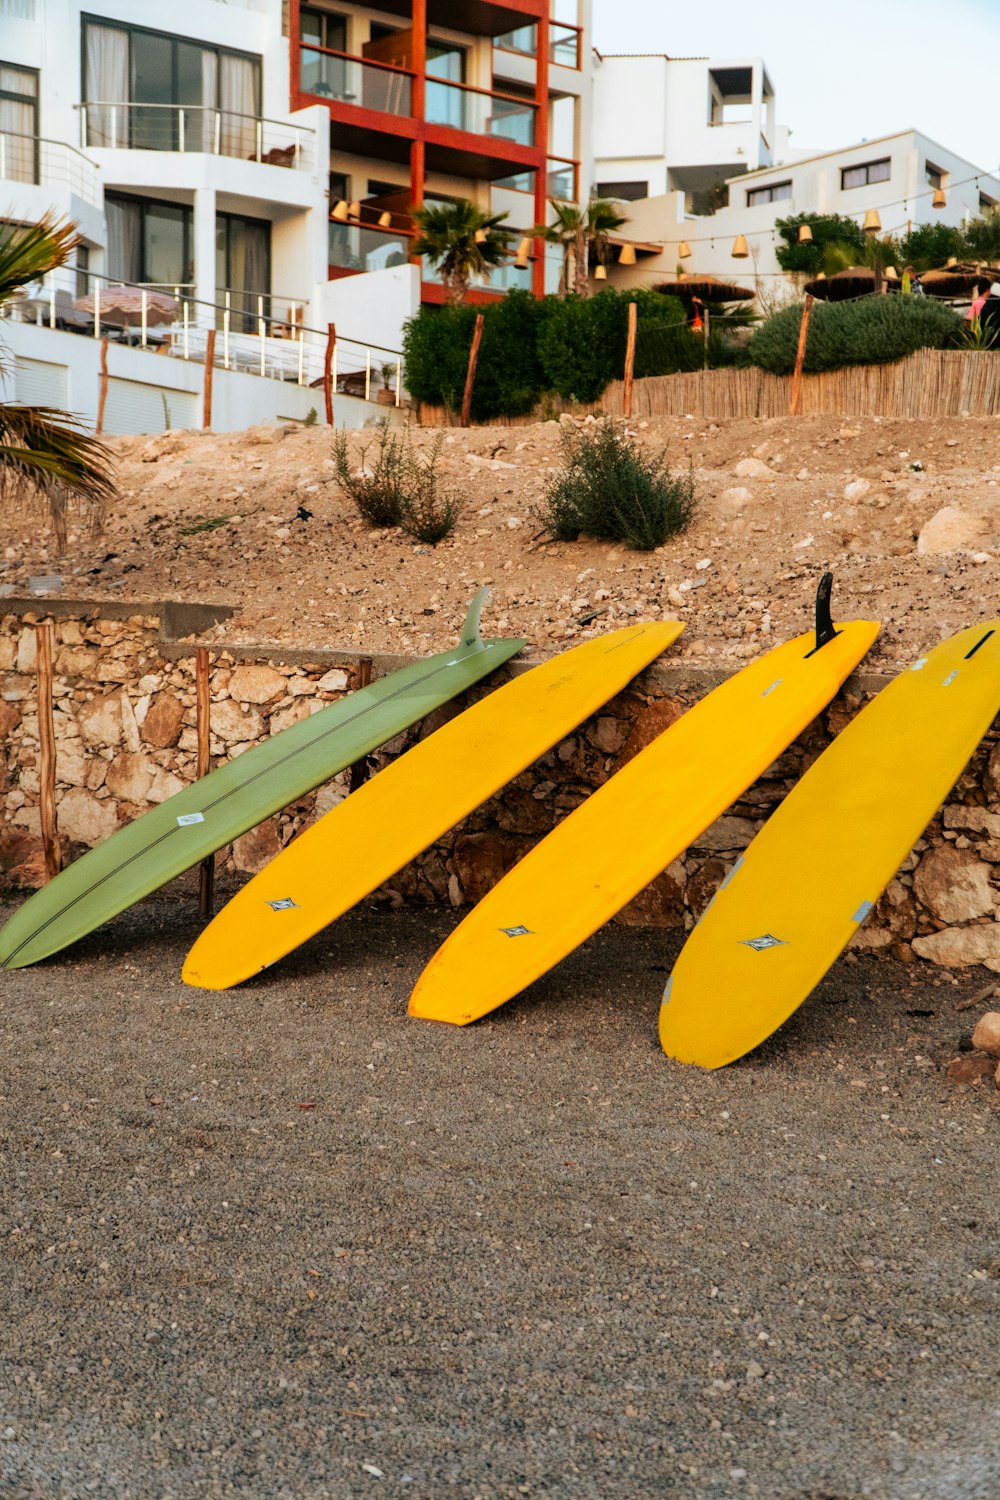 three surfboards leaning against a stone wall